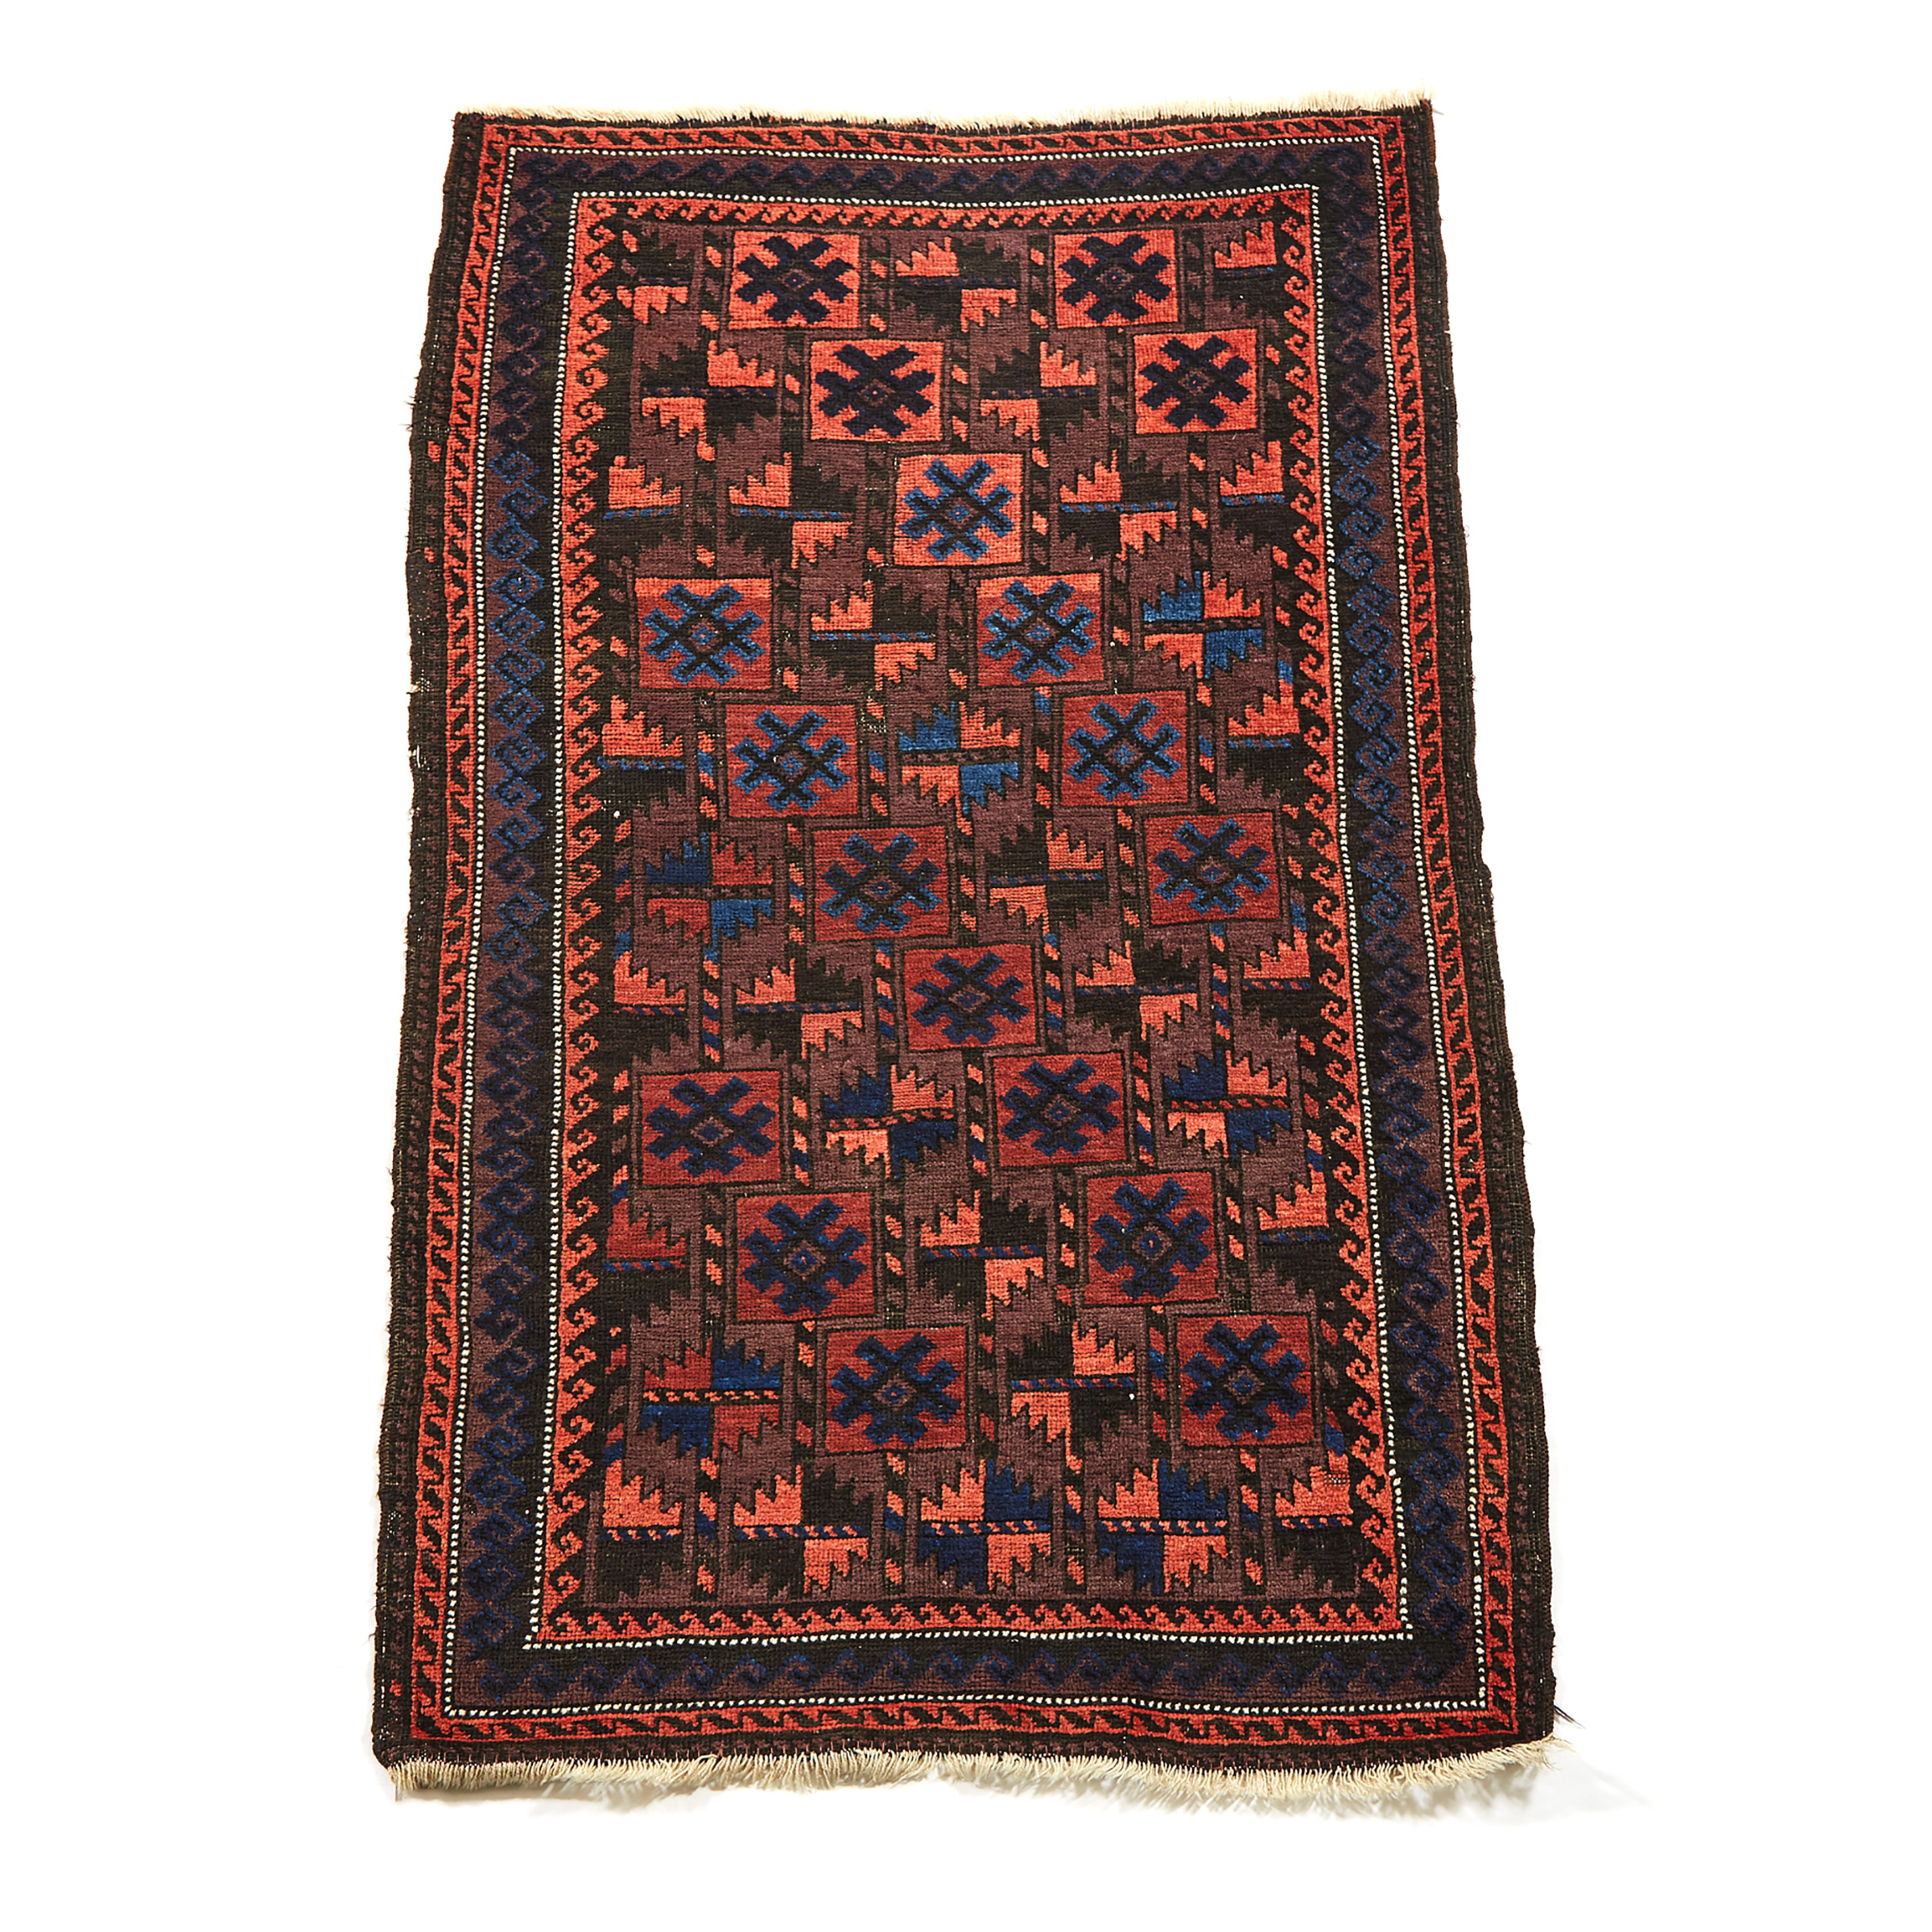 Baluchi Rug, Central Asia, early 20th century